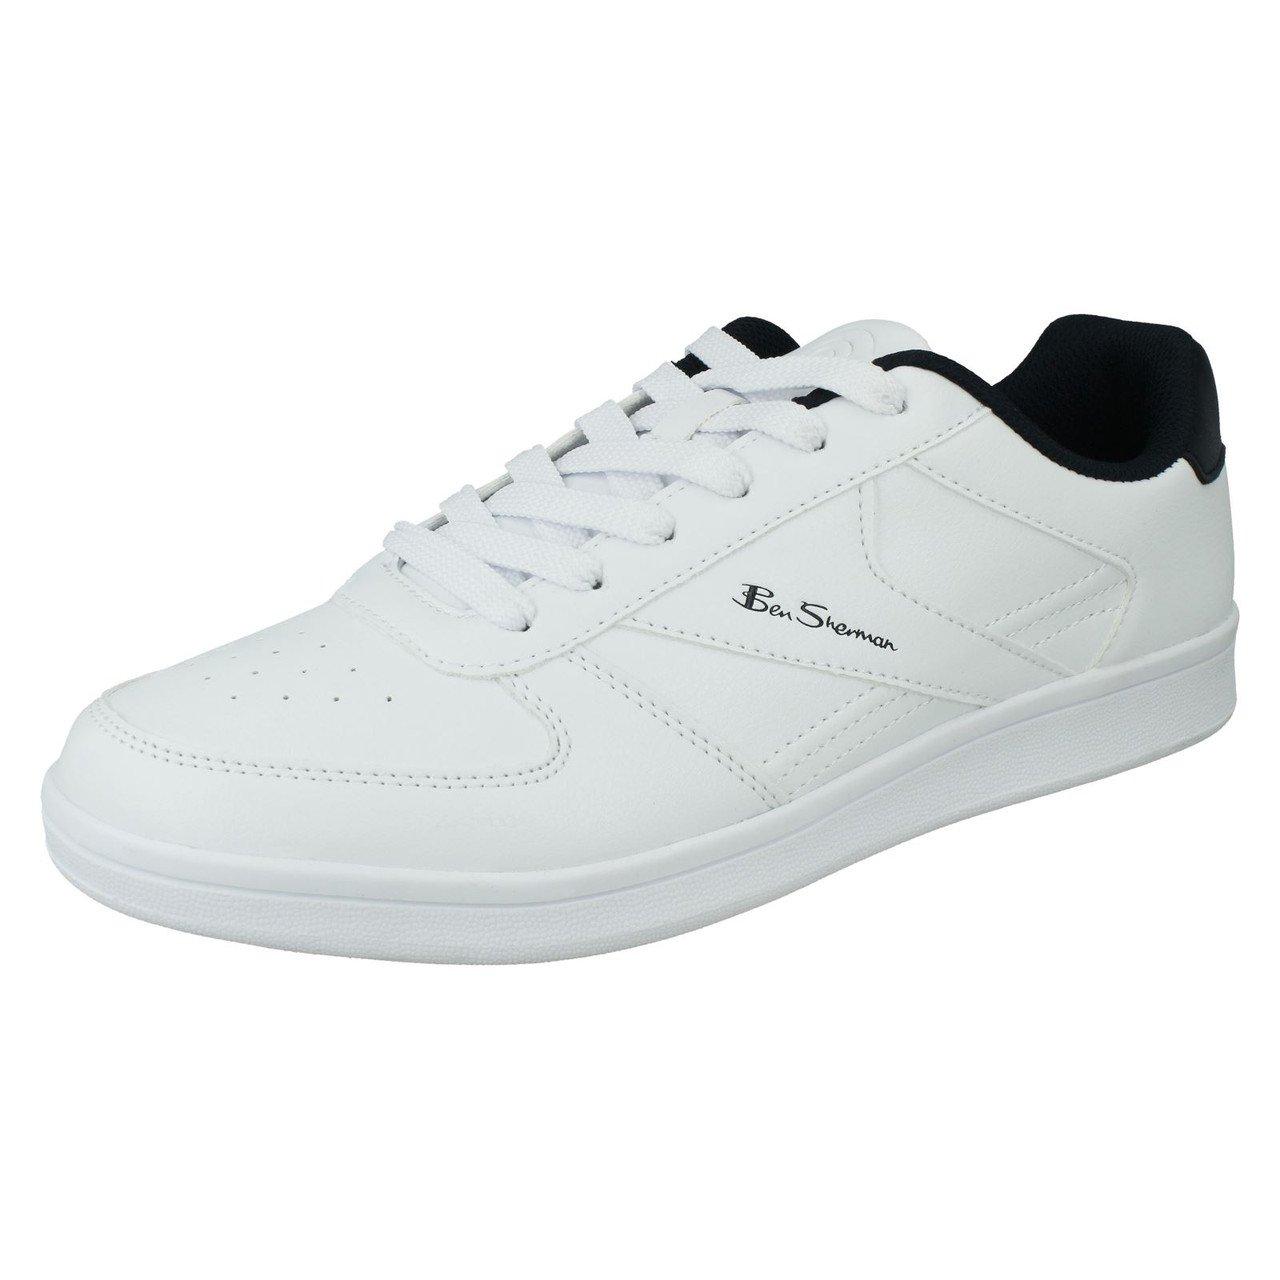 ben sherman lace up trainer - campus